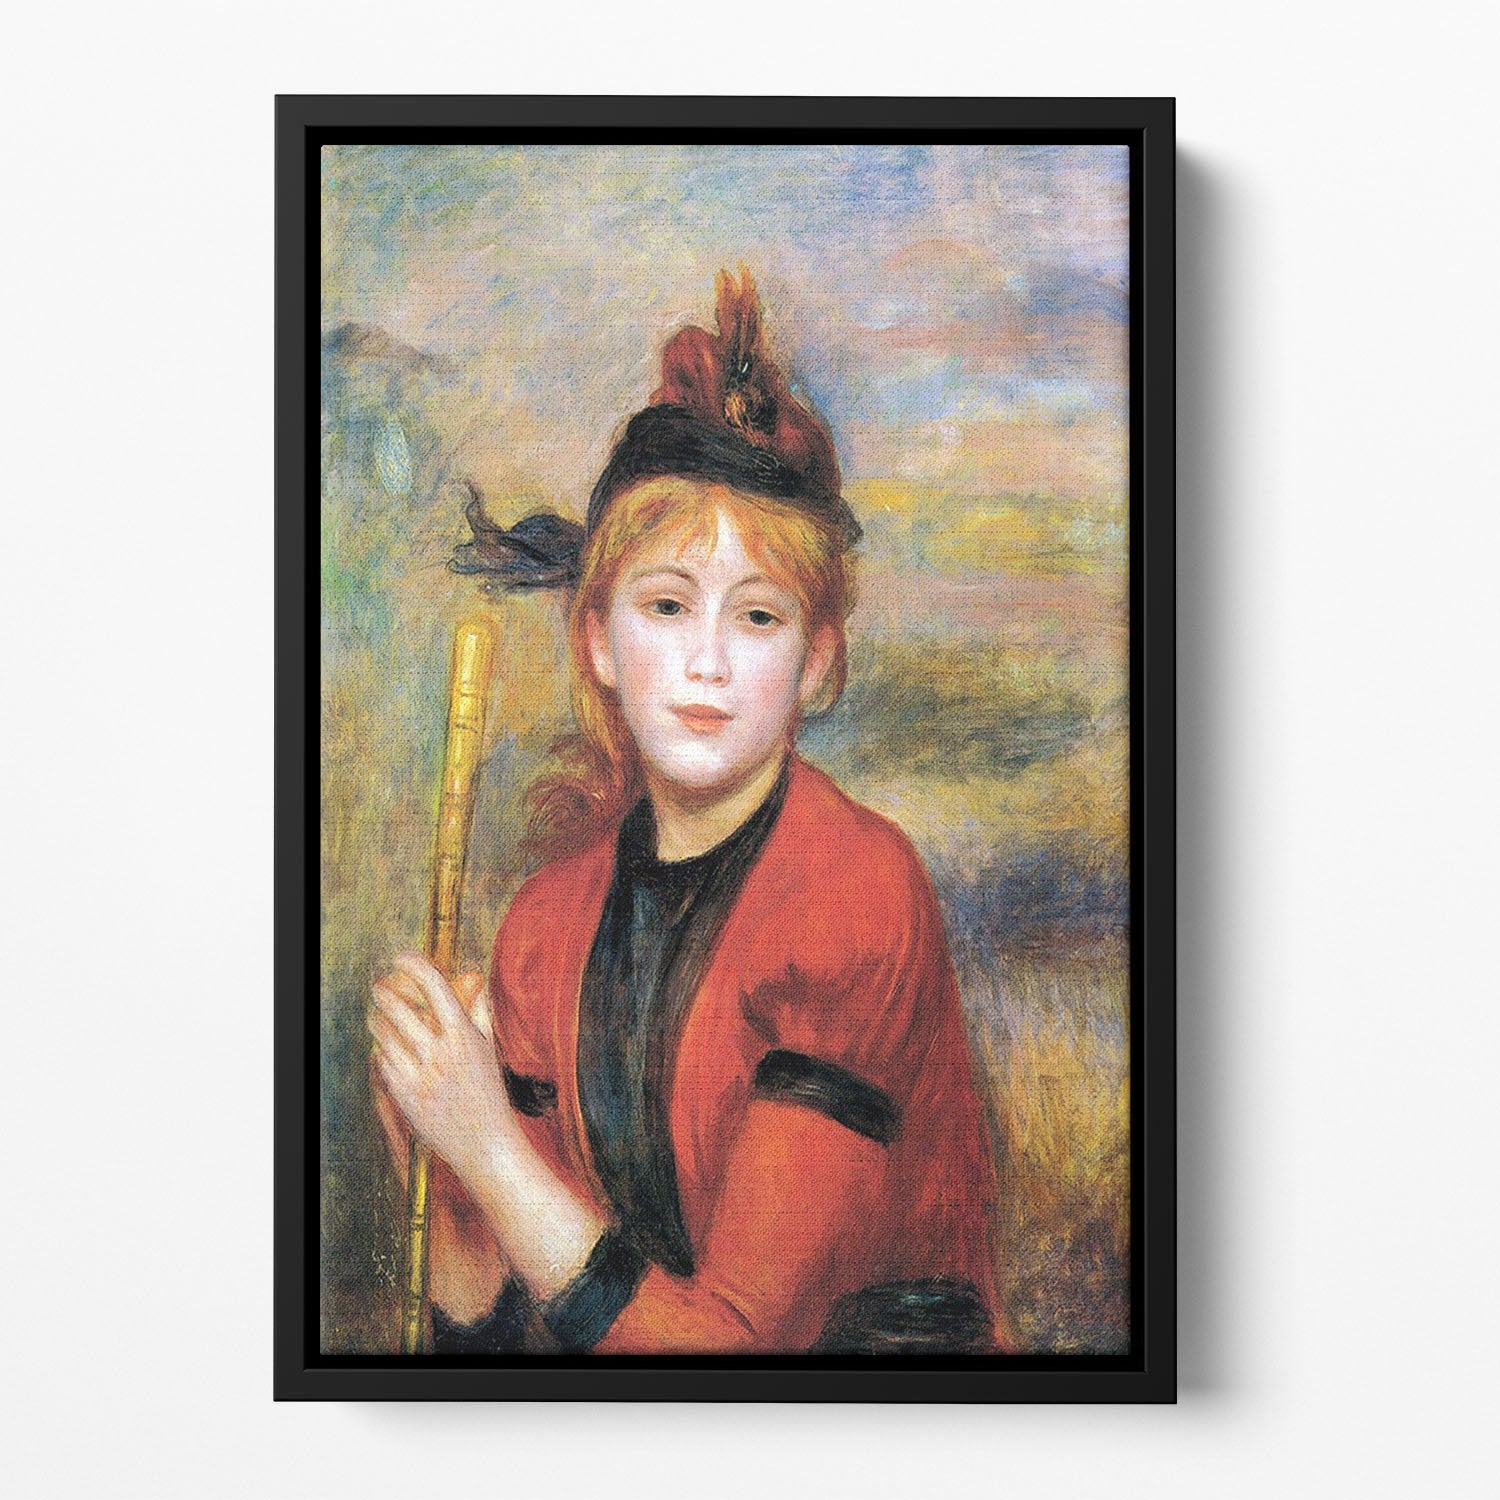 The Rambler by Renoir Floating Framed Canvas